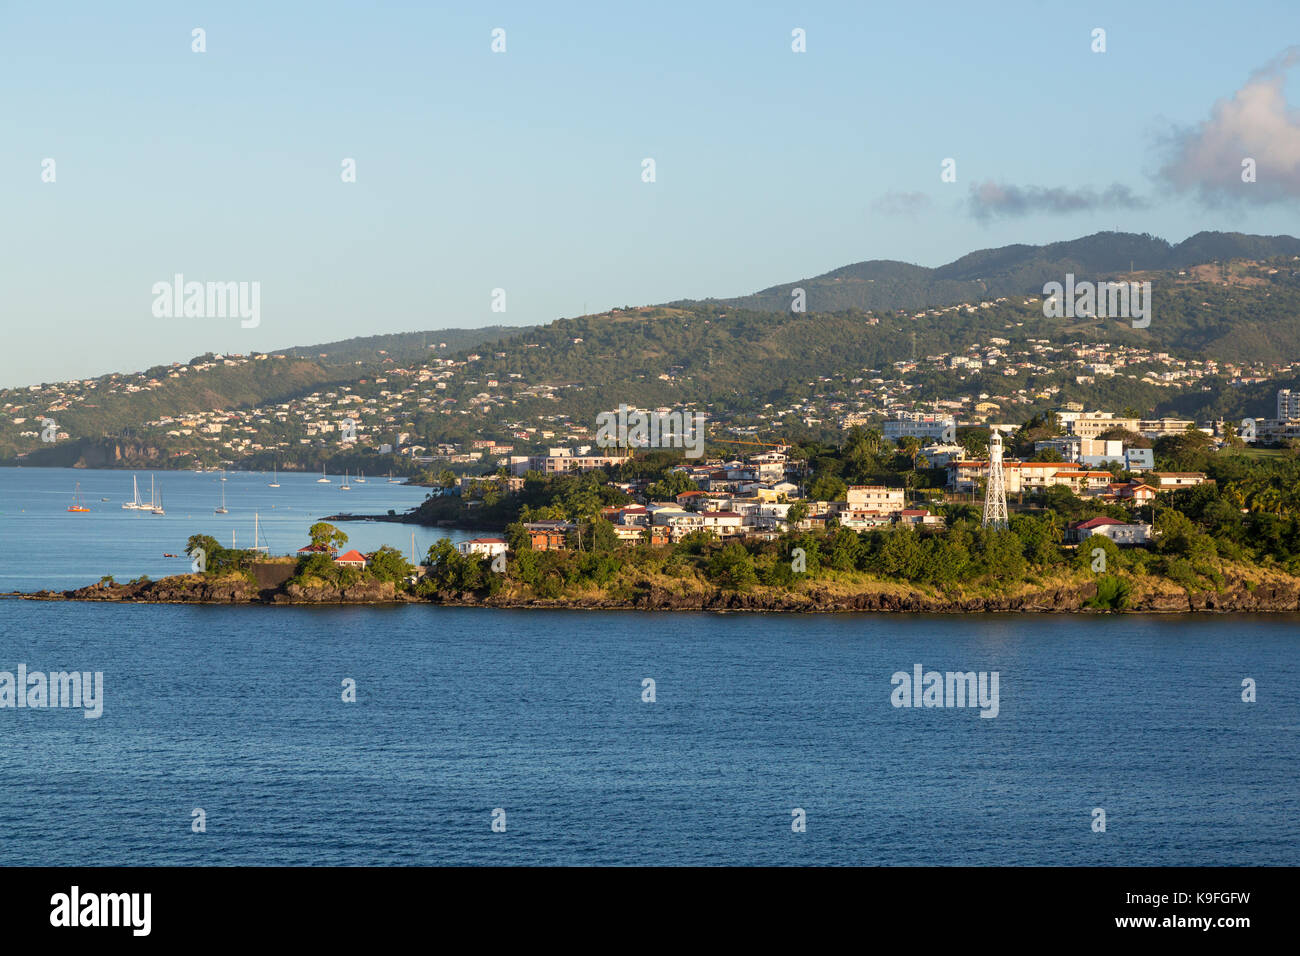 Fort-de-France, Martinique.  Approaching the Harbor, Early Morning. Stock Photo